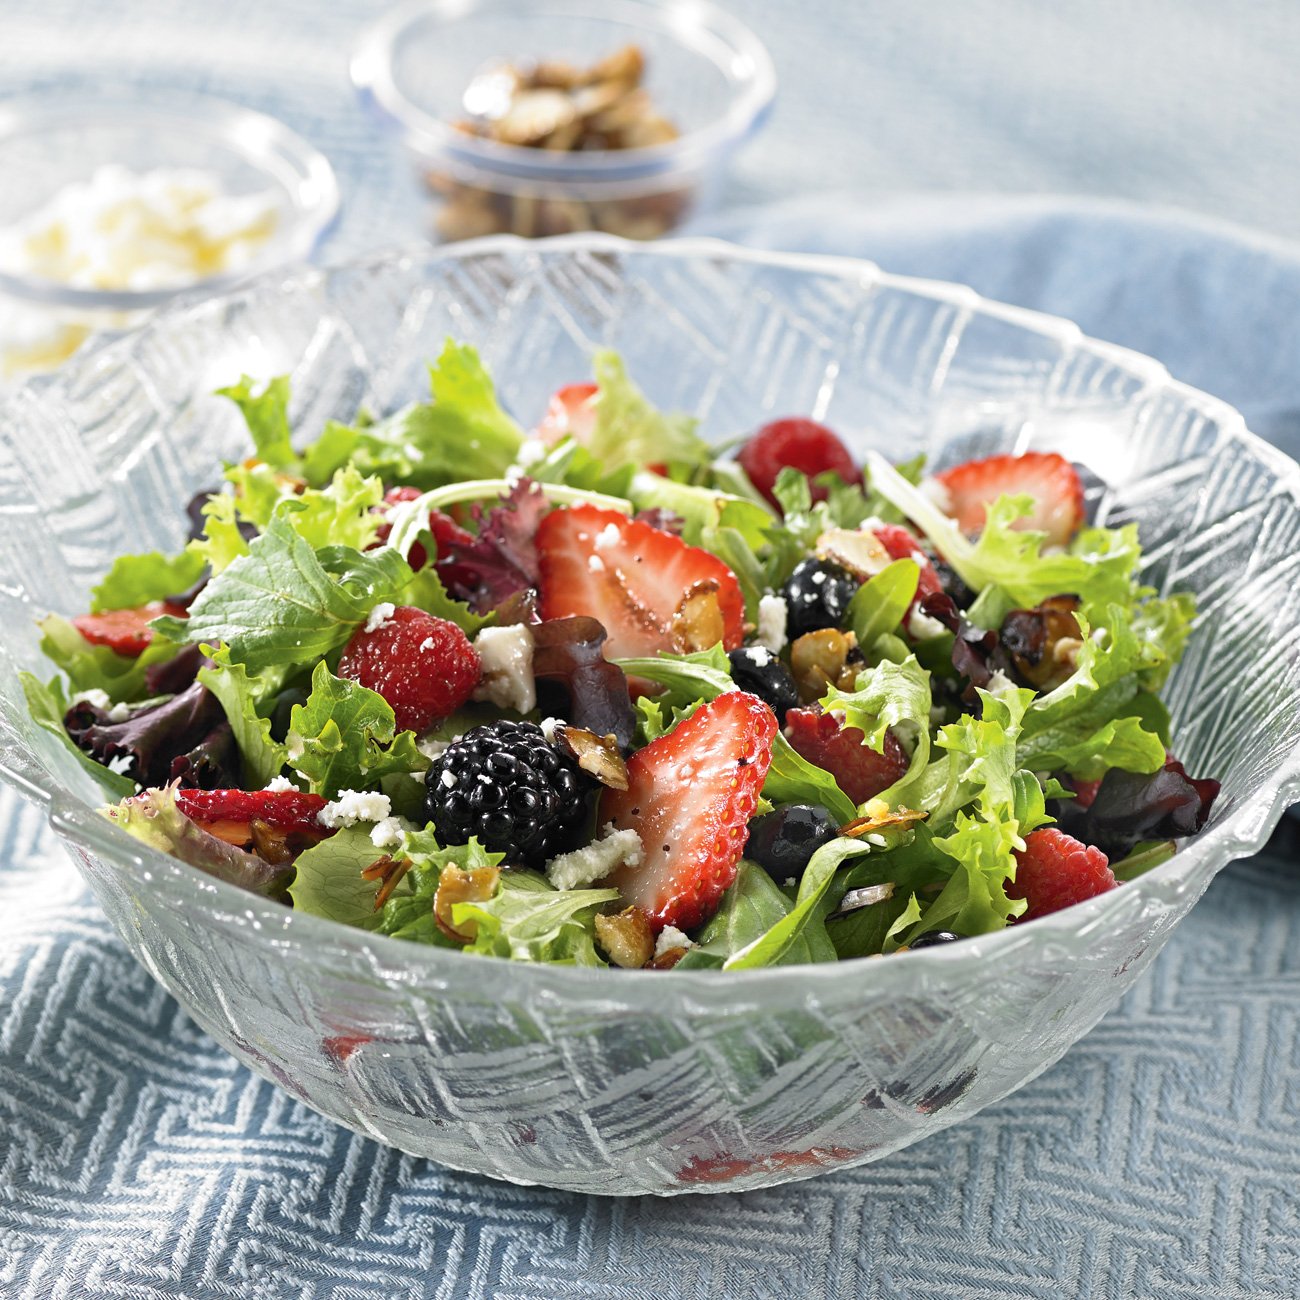 https://images.heb.com/is/image/HEBGrocery/recipe-hm-large/spring-mix-greens-with-fresh-mixed-berries-recipe.jpg